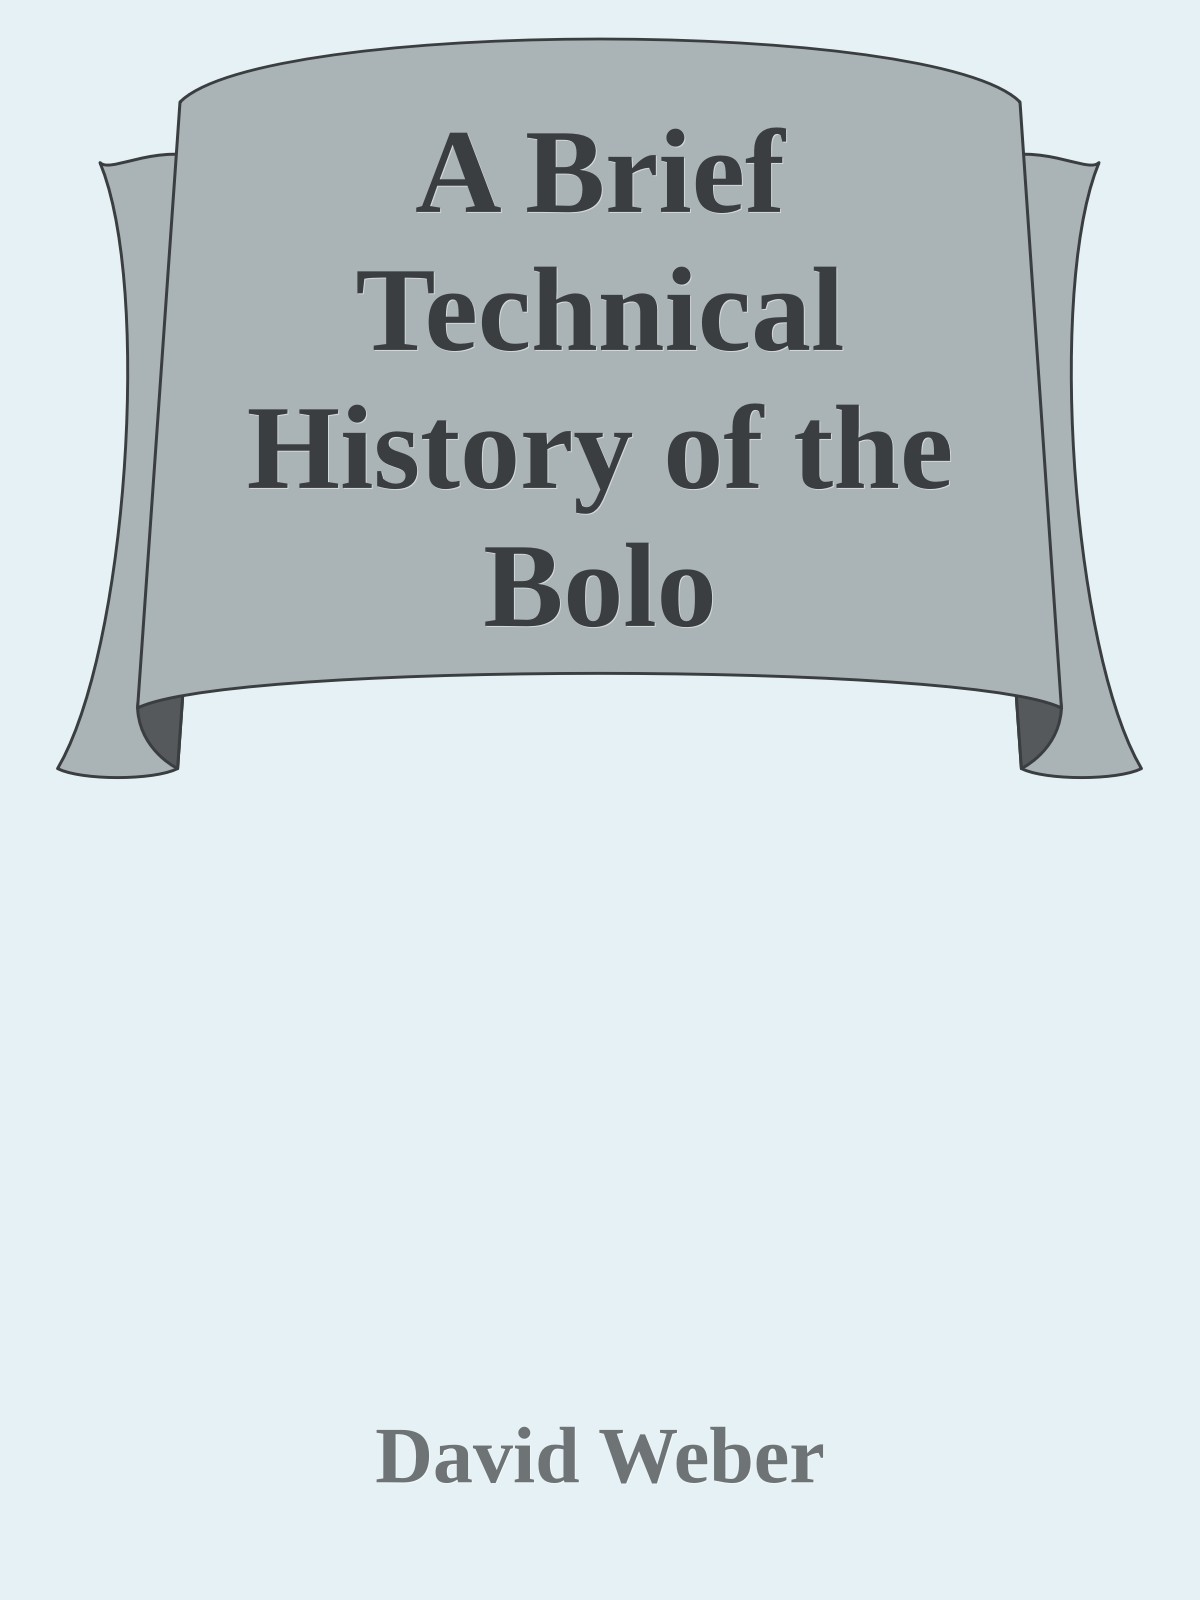 A Brief Technical History of the Bolo